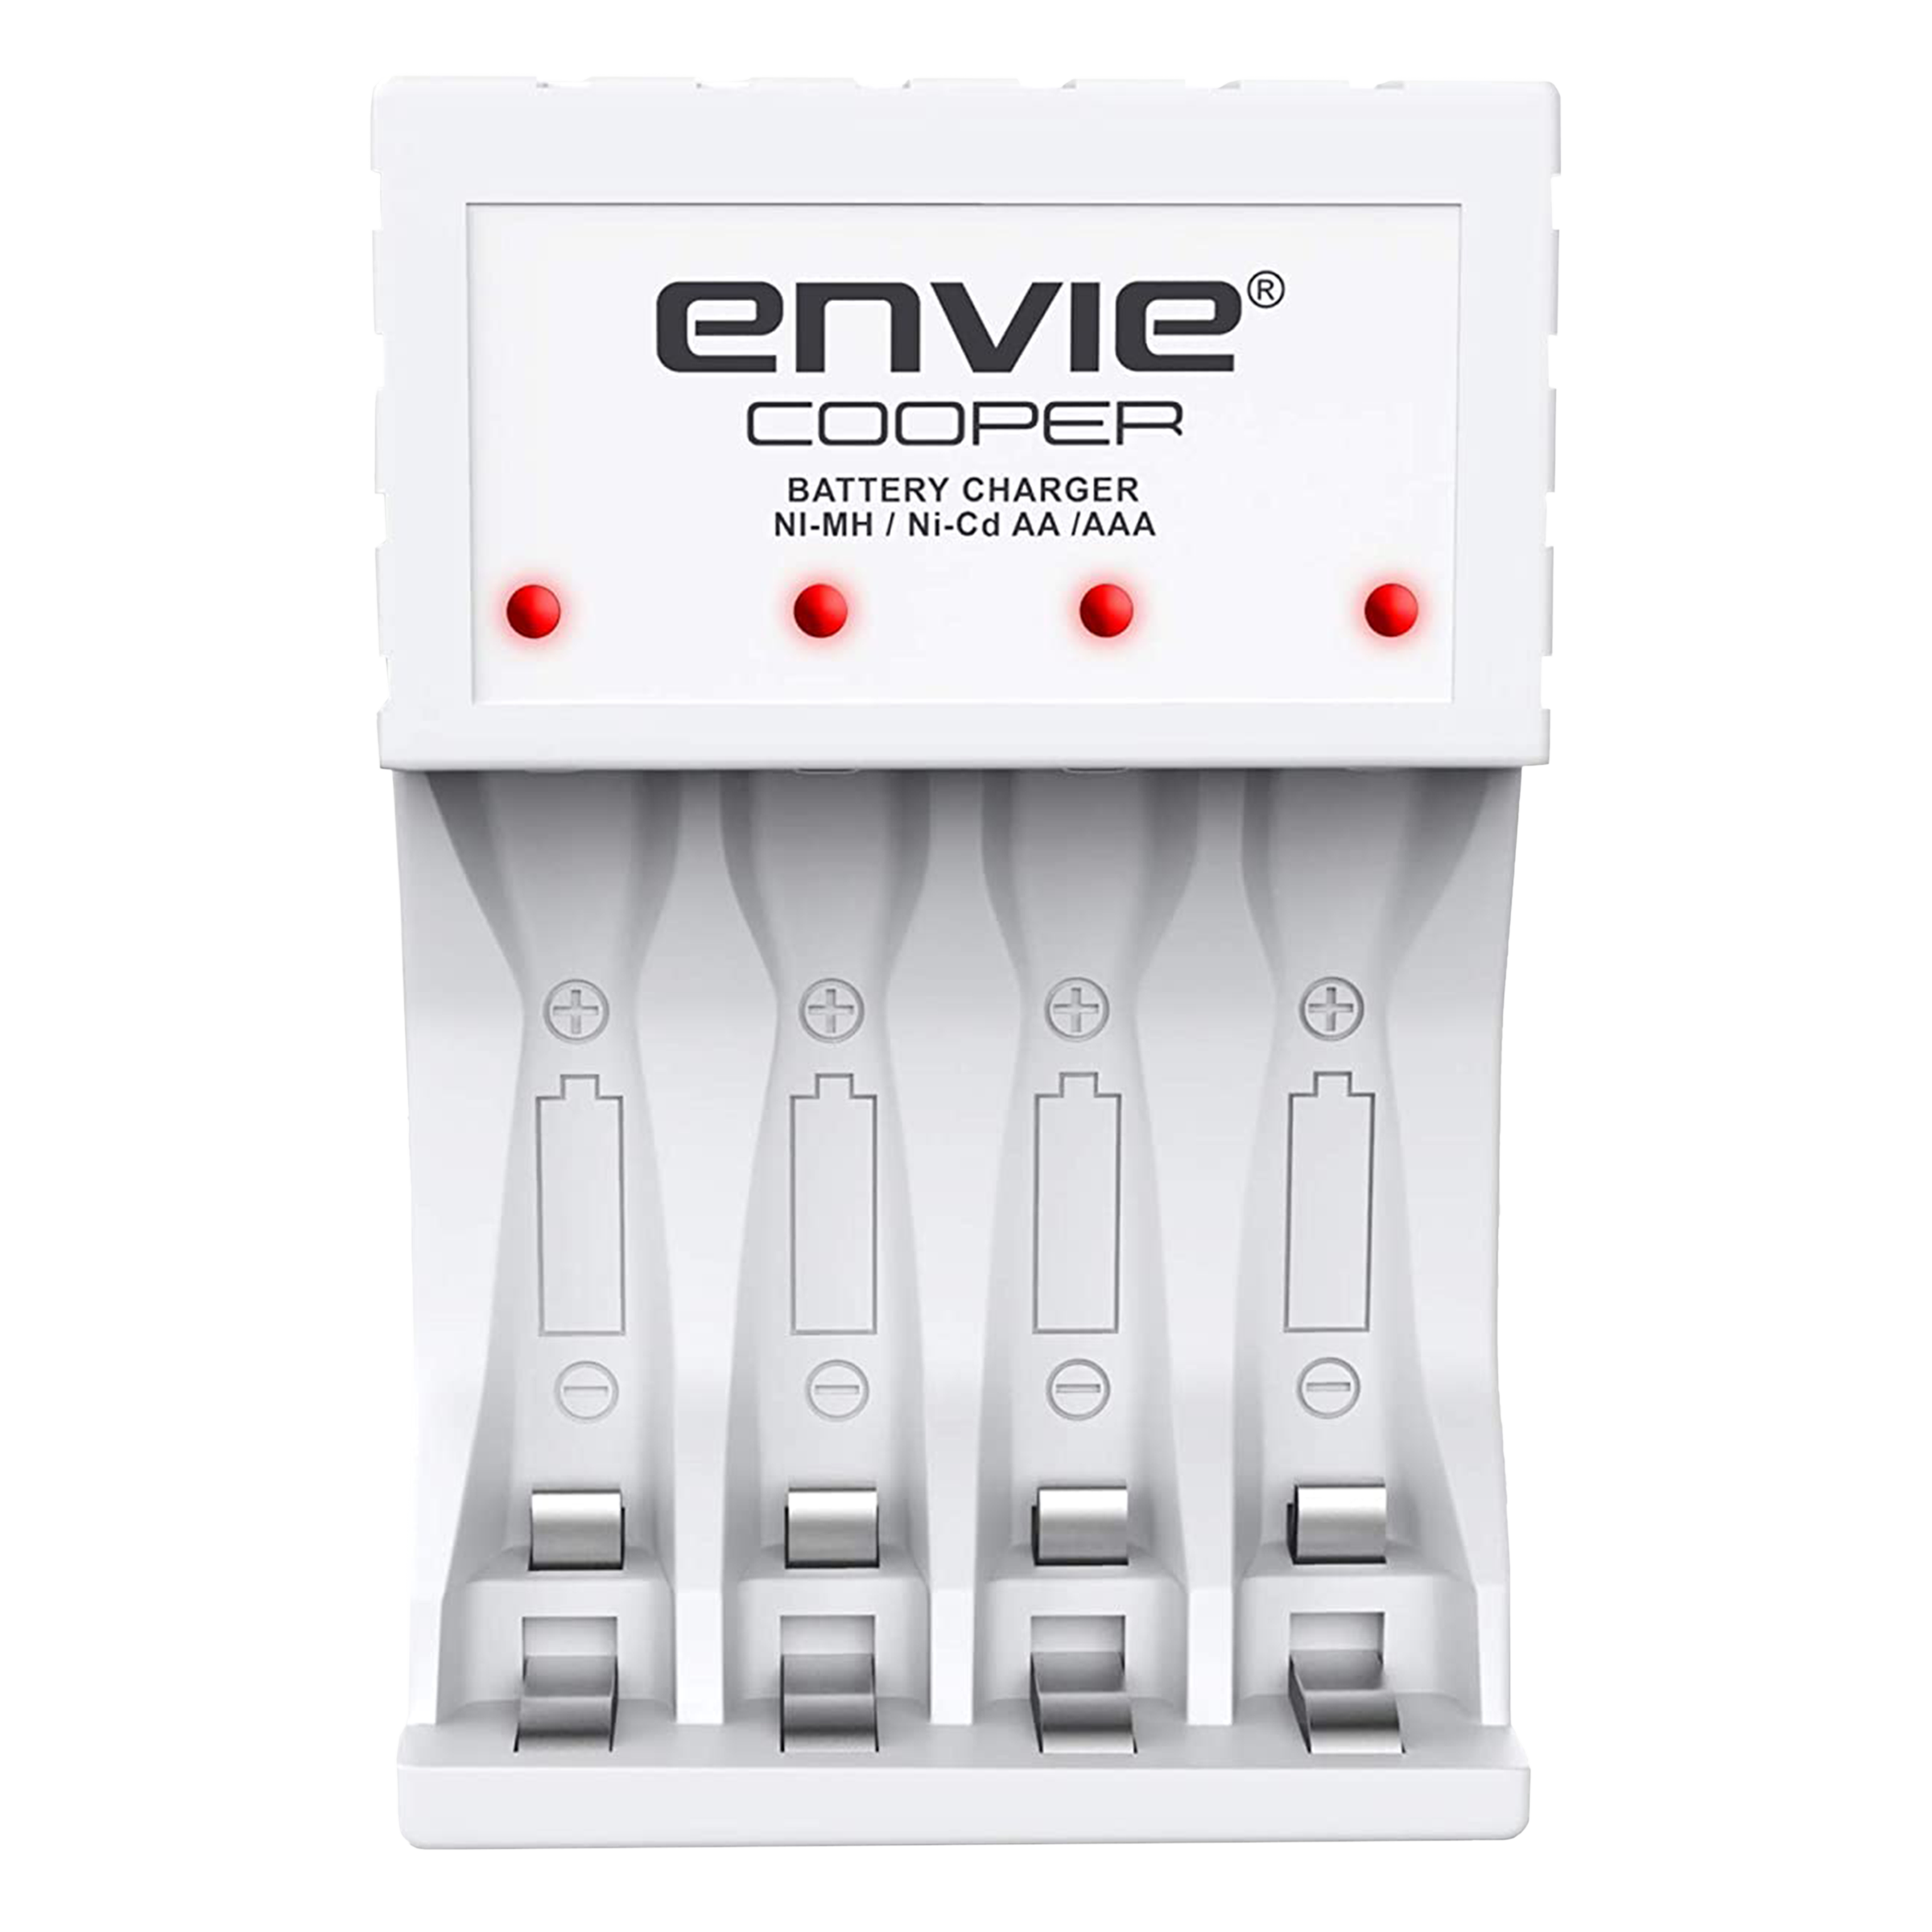 envie Cooper ECR-20 MC Camera Battery Charger for (4-Ports, Short Circuit Protection)